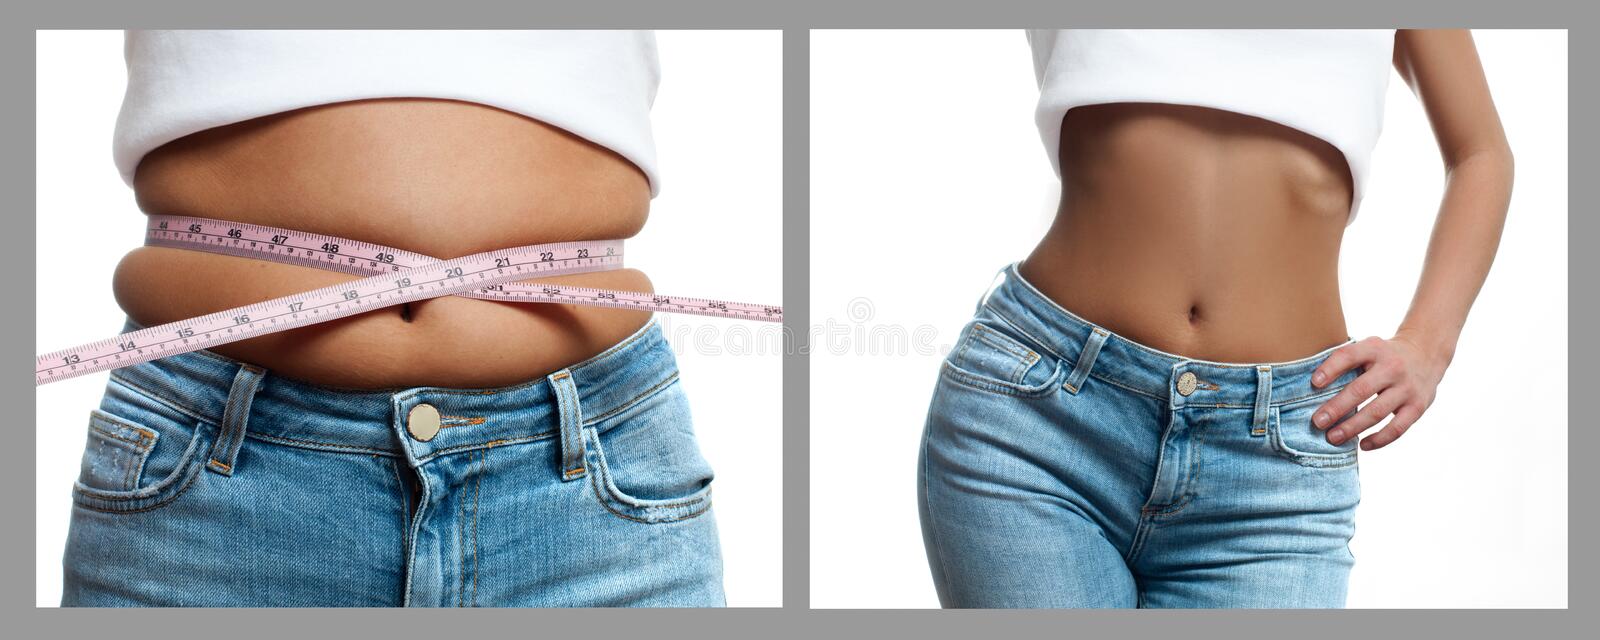 woman-s-body-weight-loss-diet-concept-female-body-weight-loss-diet-concept-woman-measuring-107095917.jpg